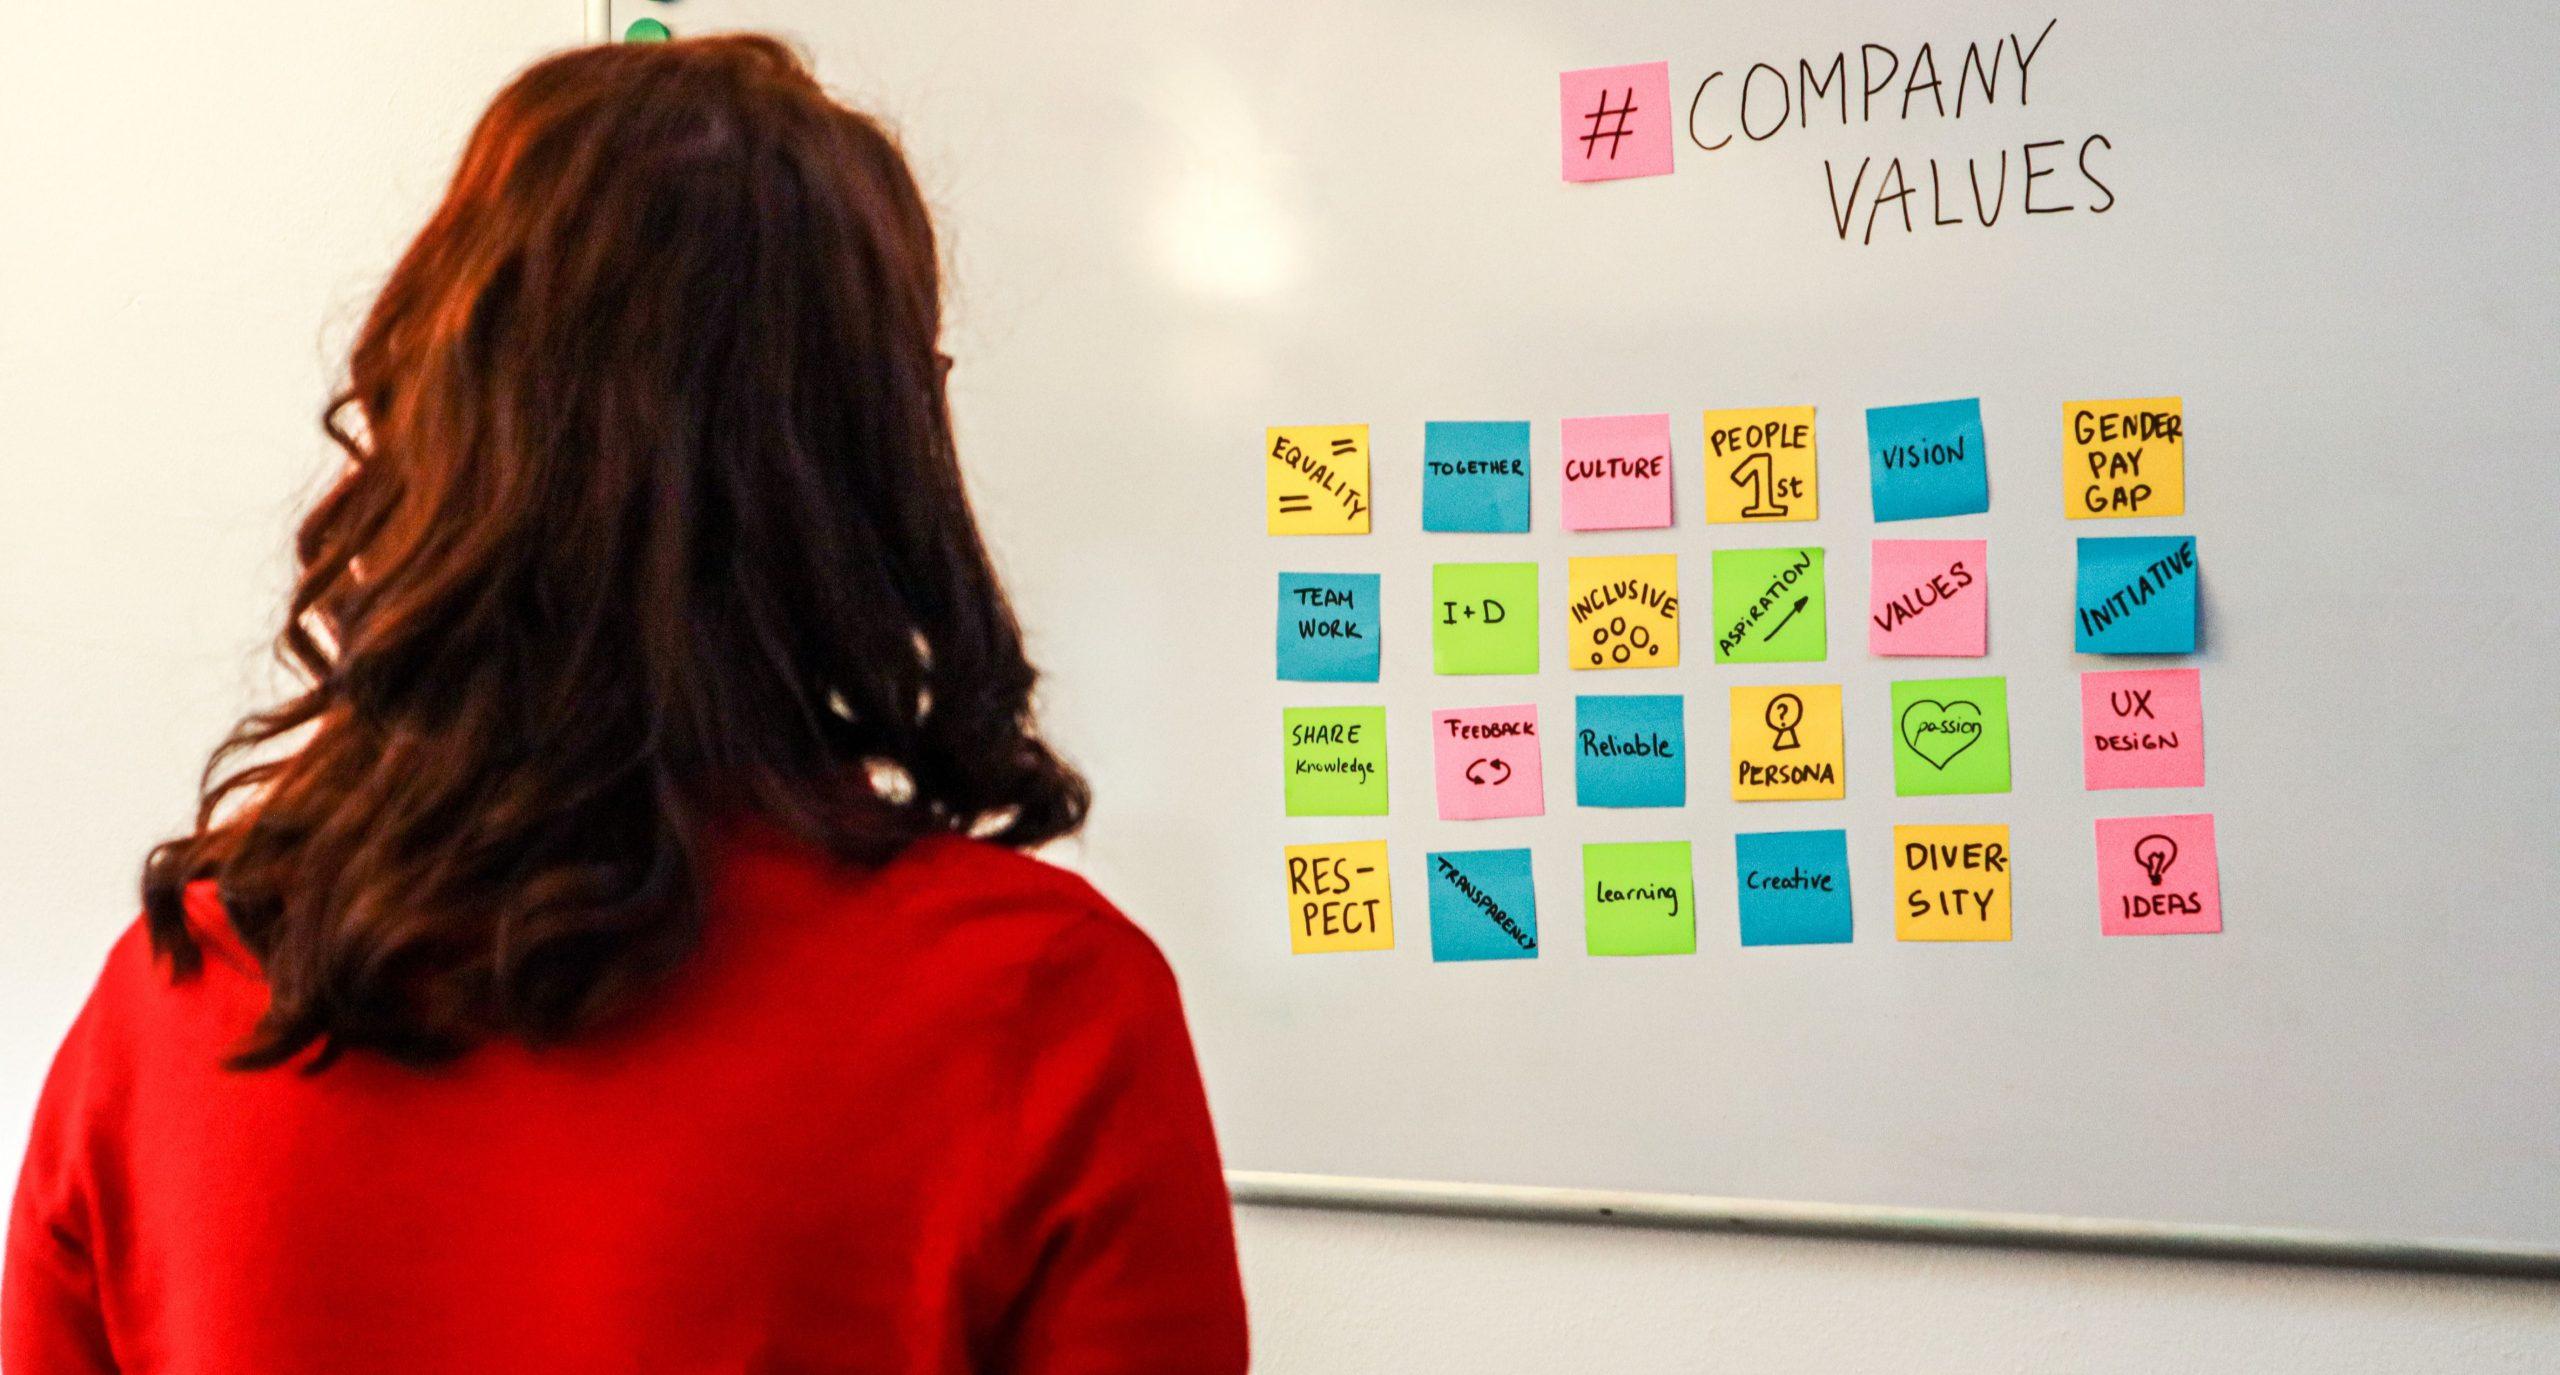 Woman looking at a whiteboard with post-it notes showing company values.